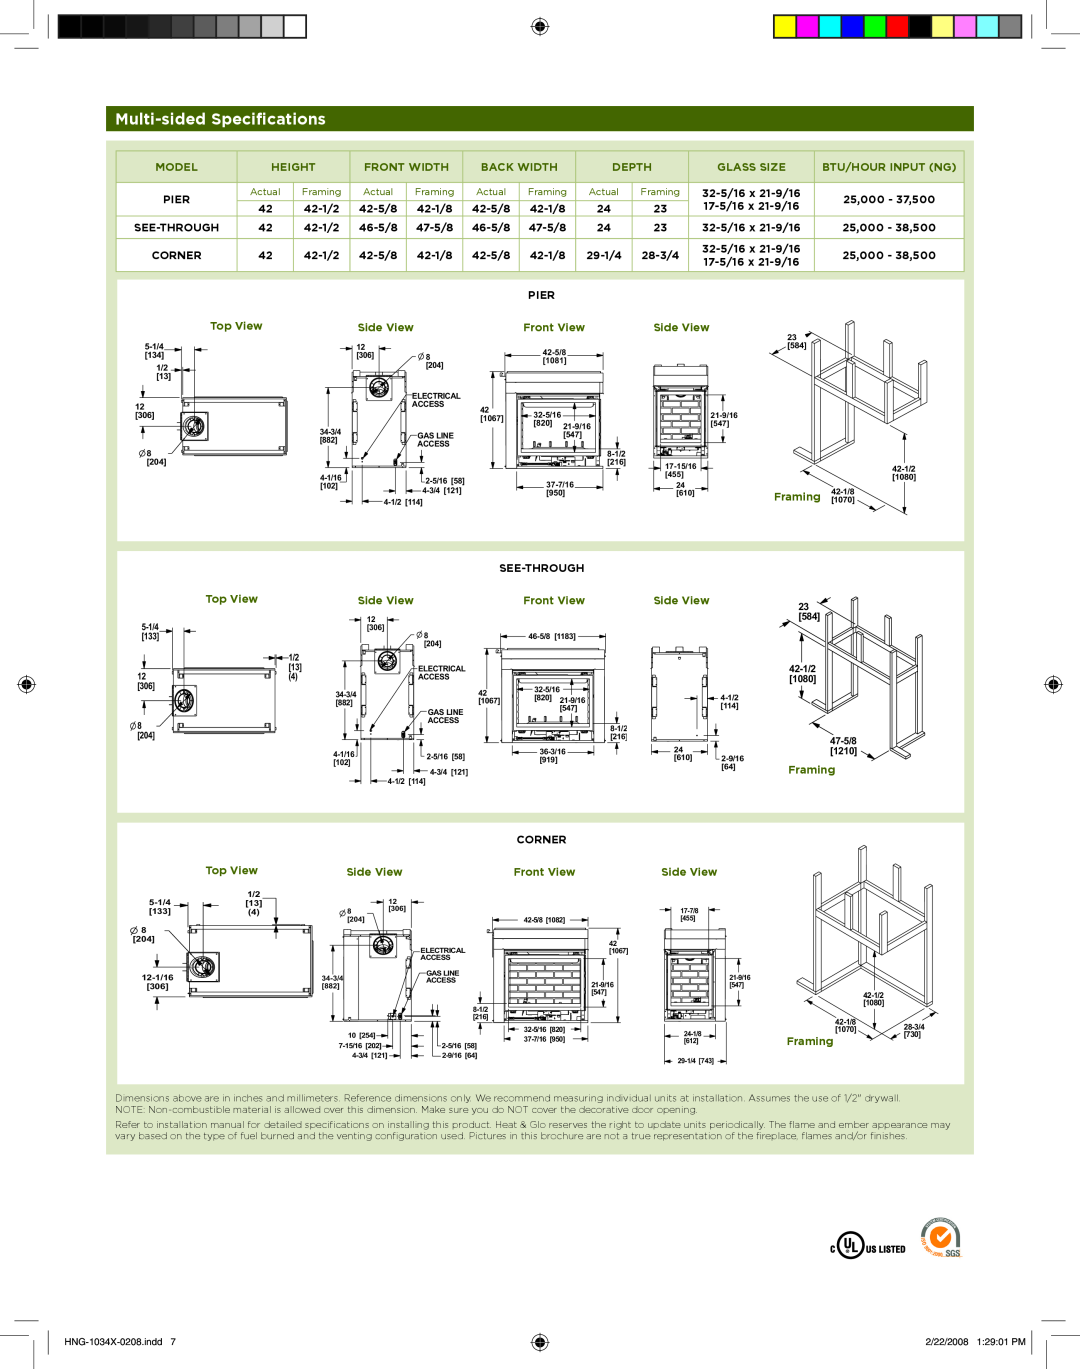 Hearth and Home Technologies GATEWAY manual Multi-sided Specifications, 5-1/4 133, 42-1/2, 1080, 47-5/8, 1210 